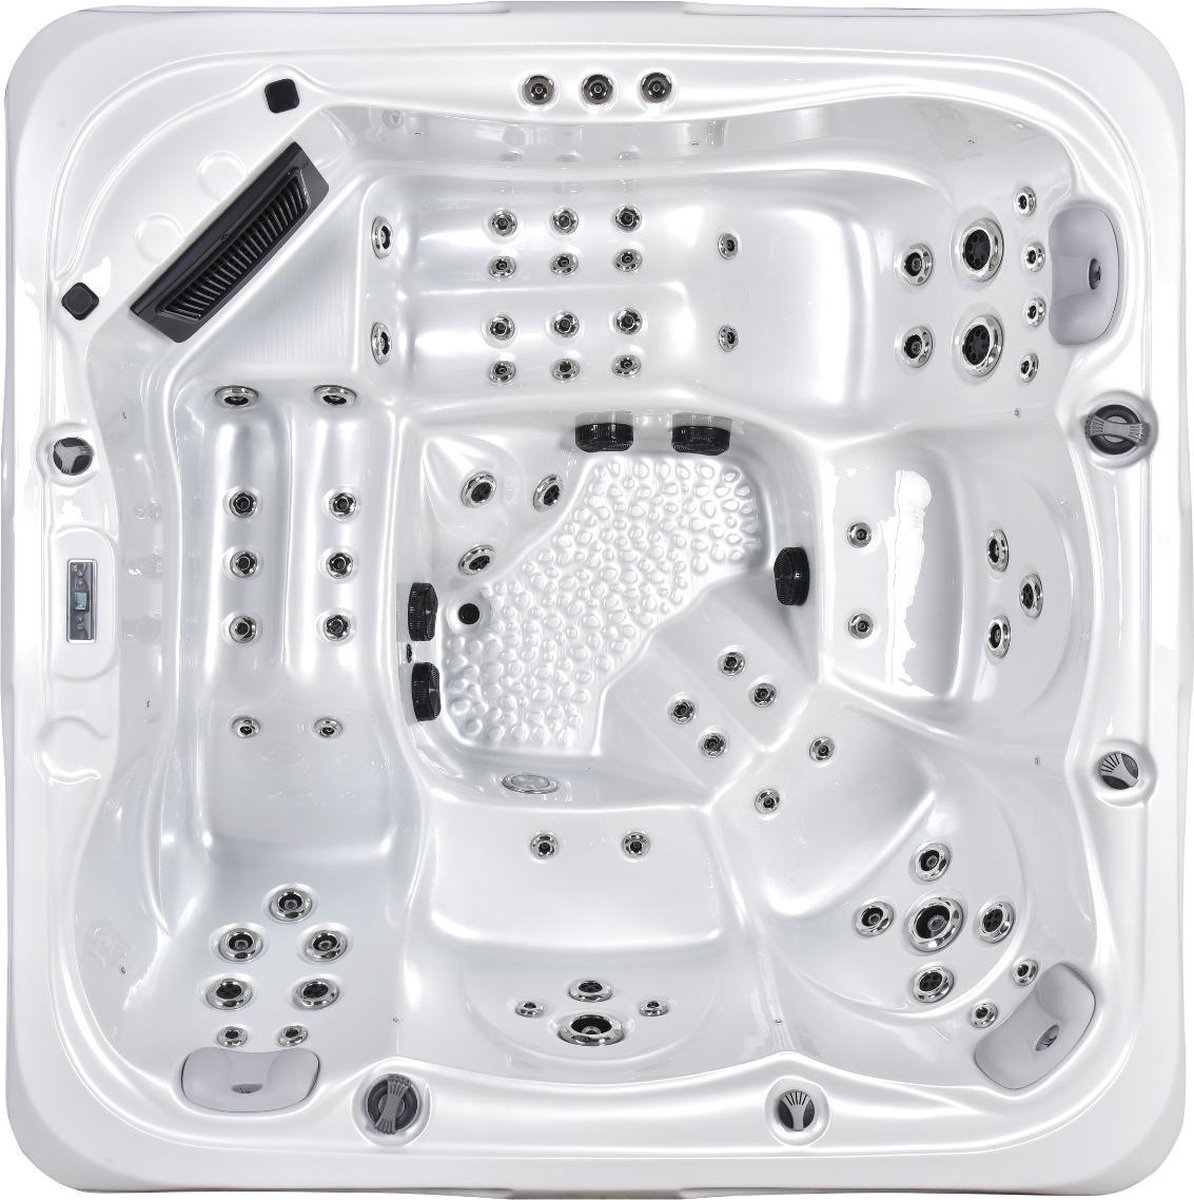 Jacuzzi King Spa Deluxe 6823 5 pers. 68 jets 2200x2200